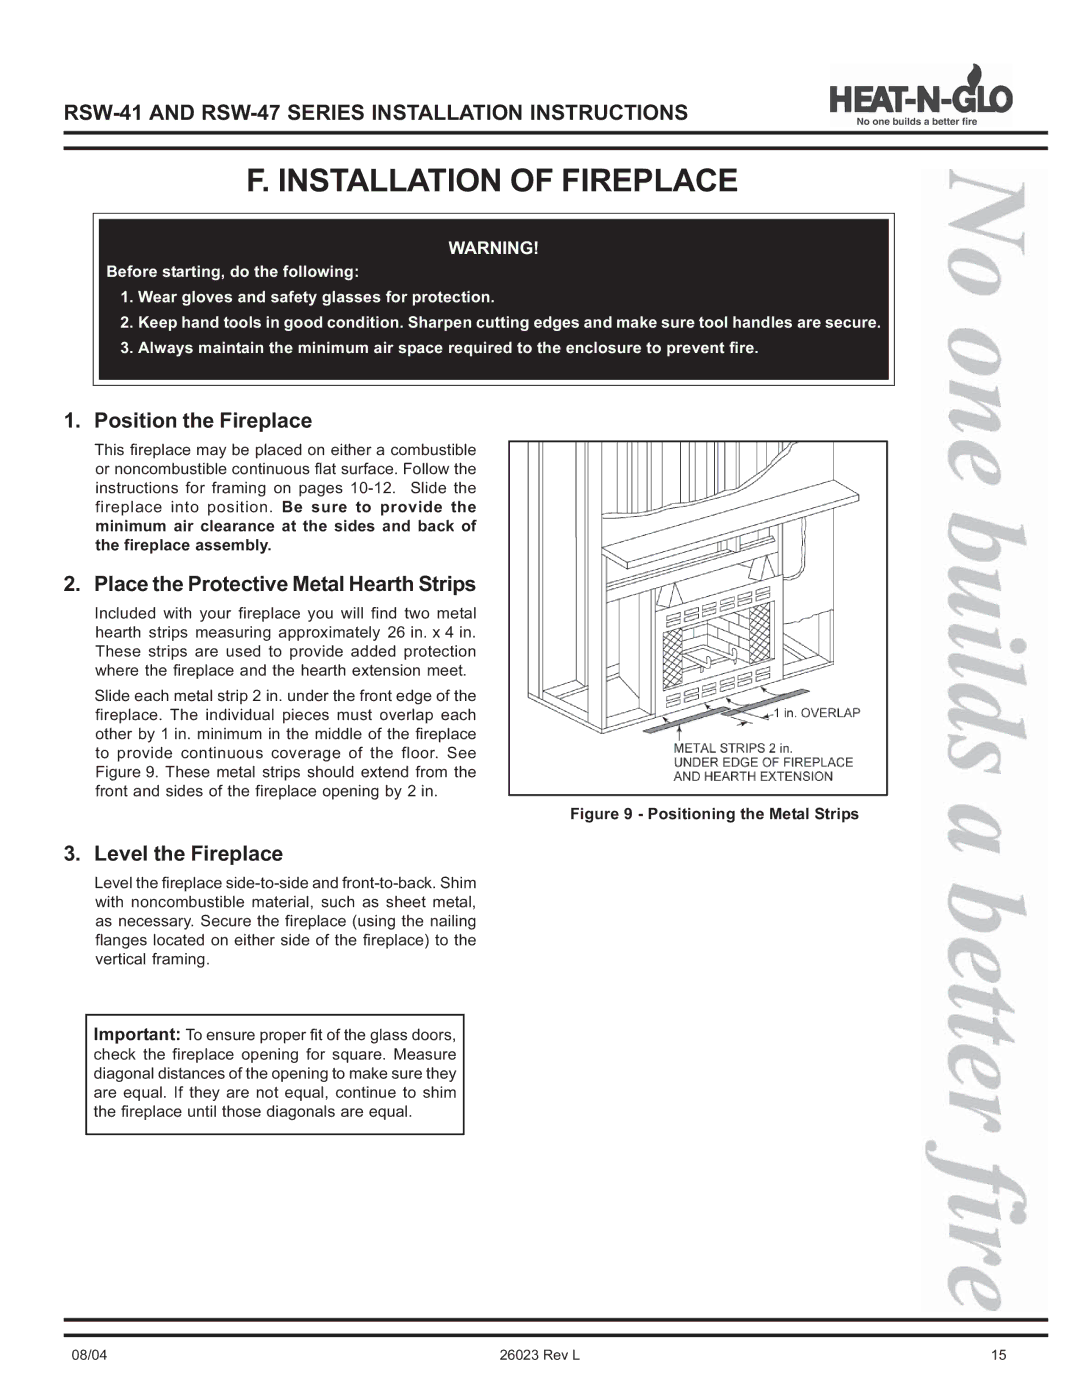 Hearth and Home Technologies RSW-47, RSW-41 manual Installation of Fireplace, Position the Fireplace, Level the Fireplace 